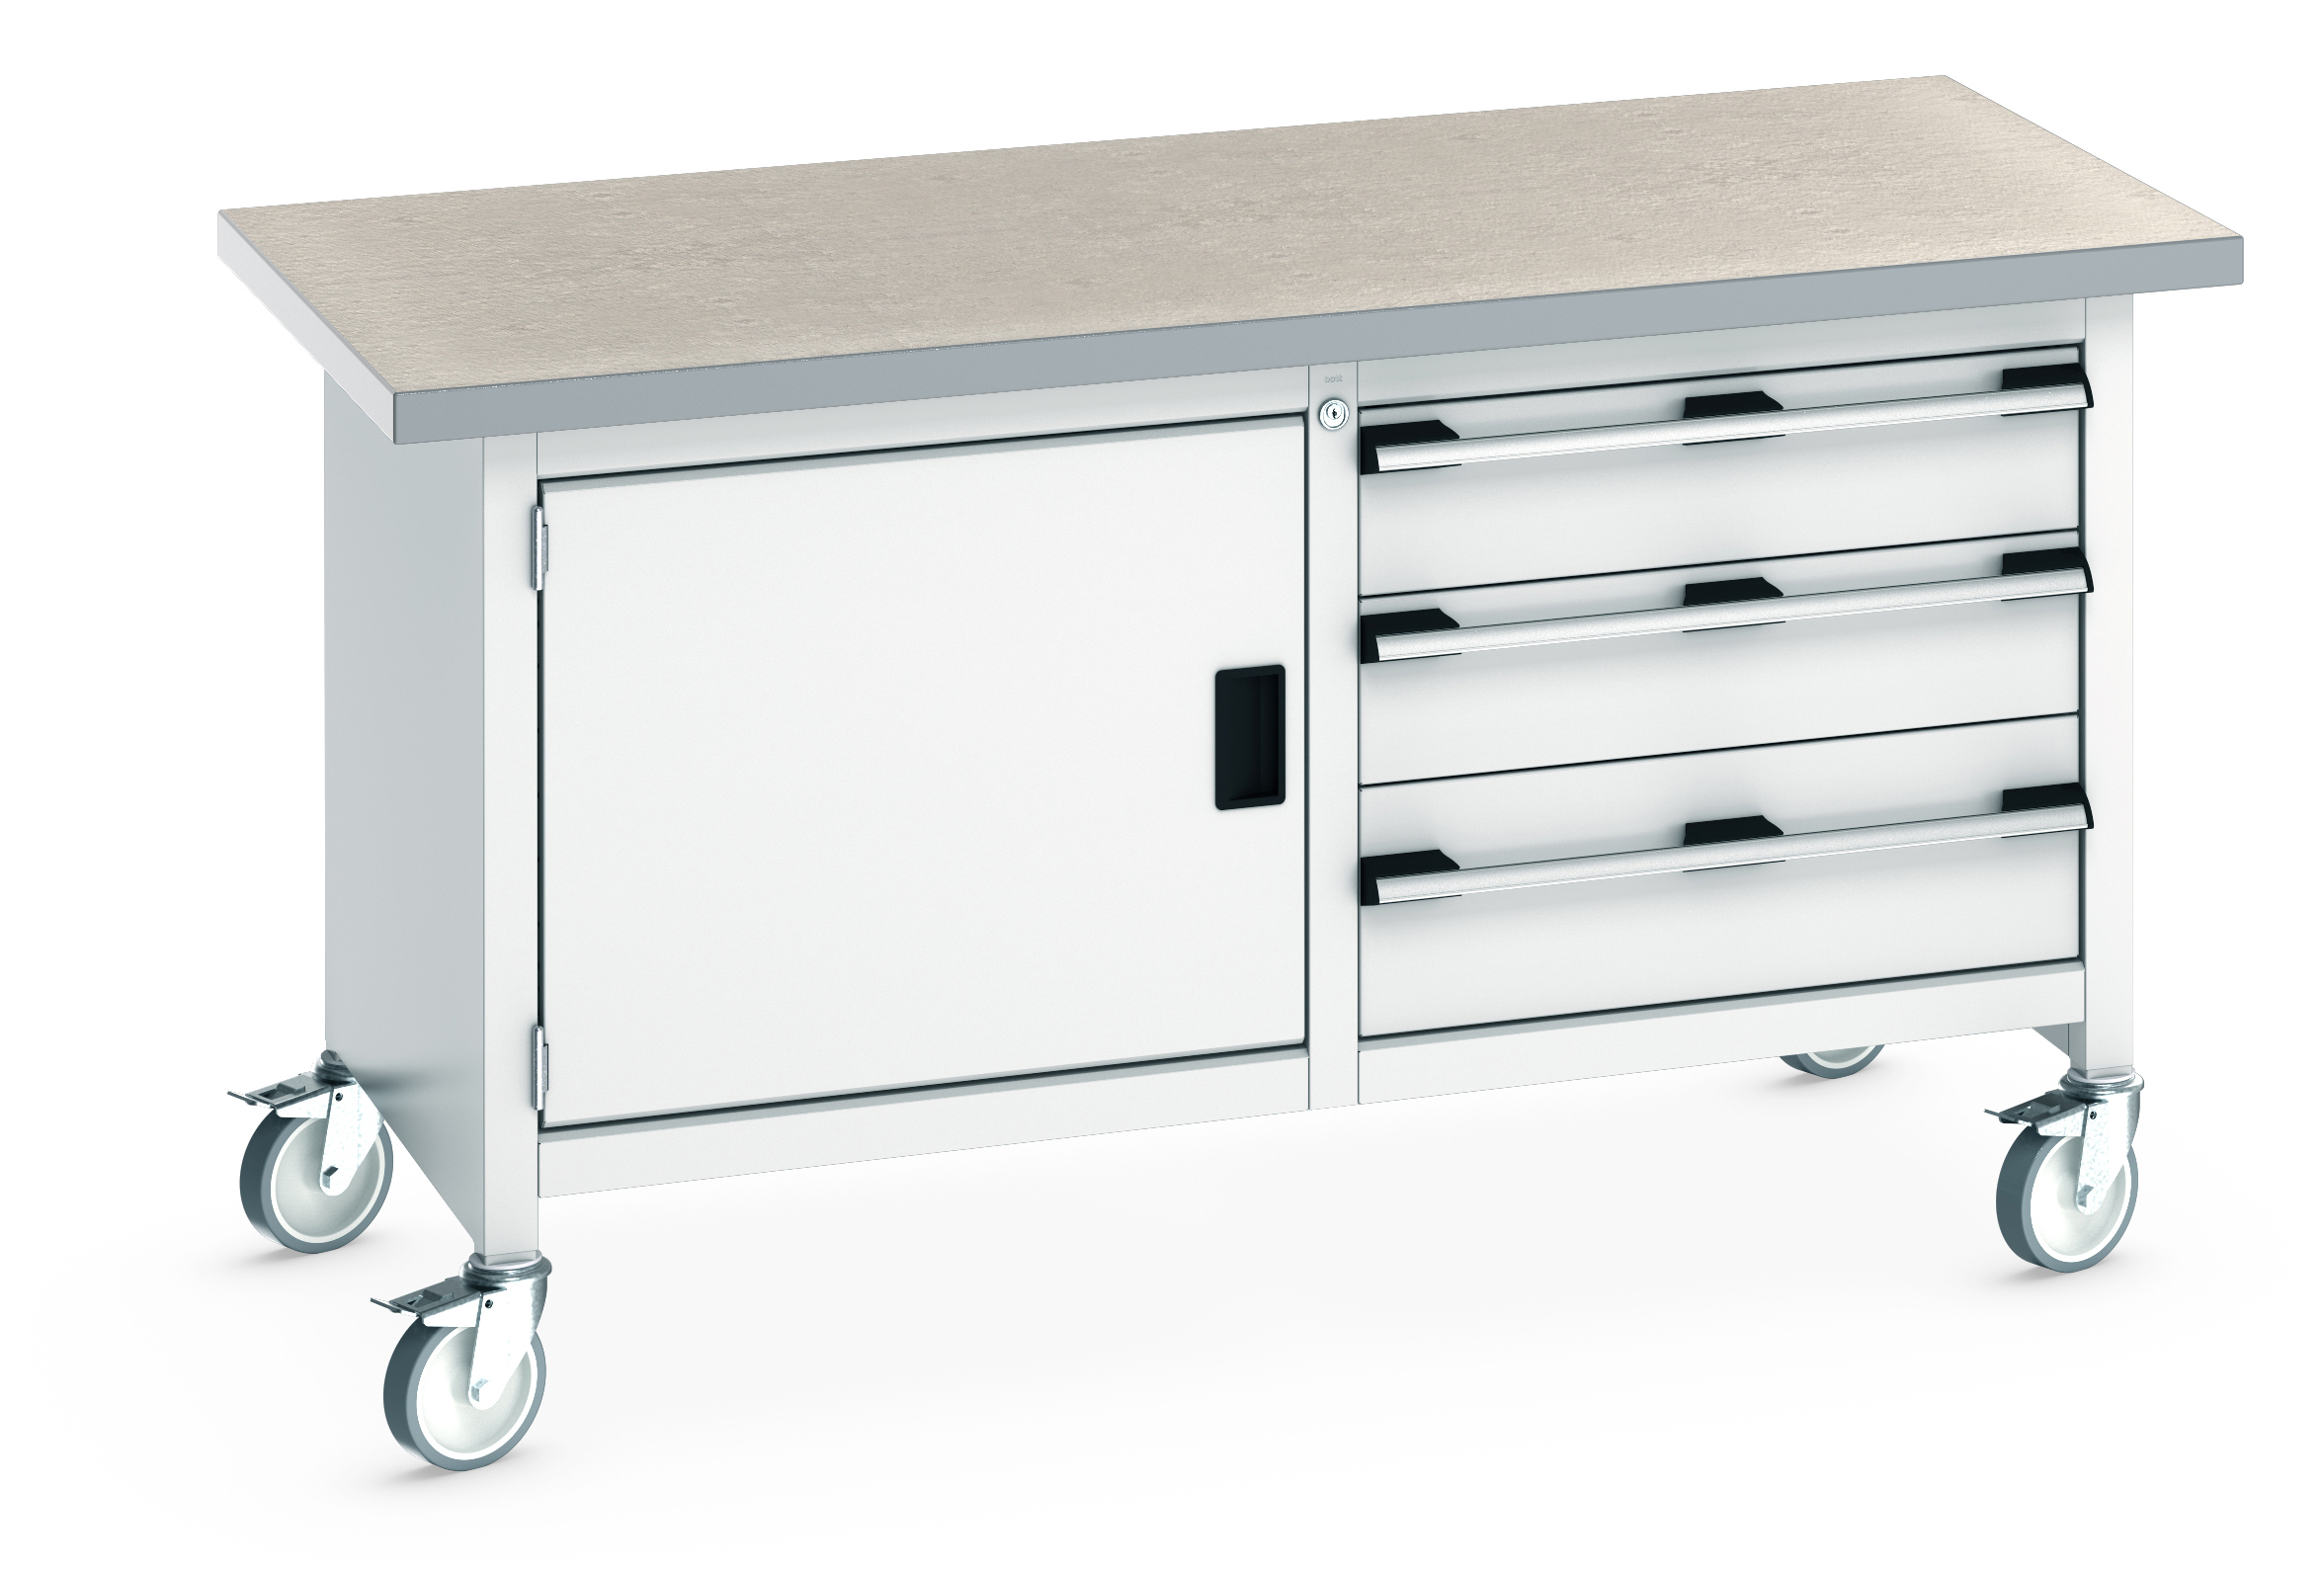 Bott Cubio Mobile Storage Bench With Full Cupboard / 3 Drawer Cabinet - 41002102.16V